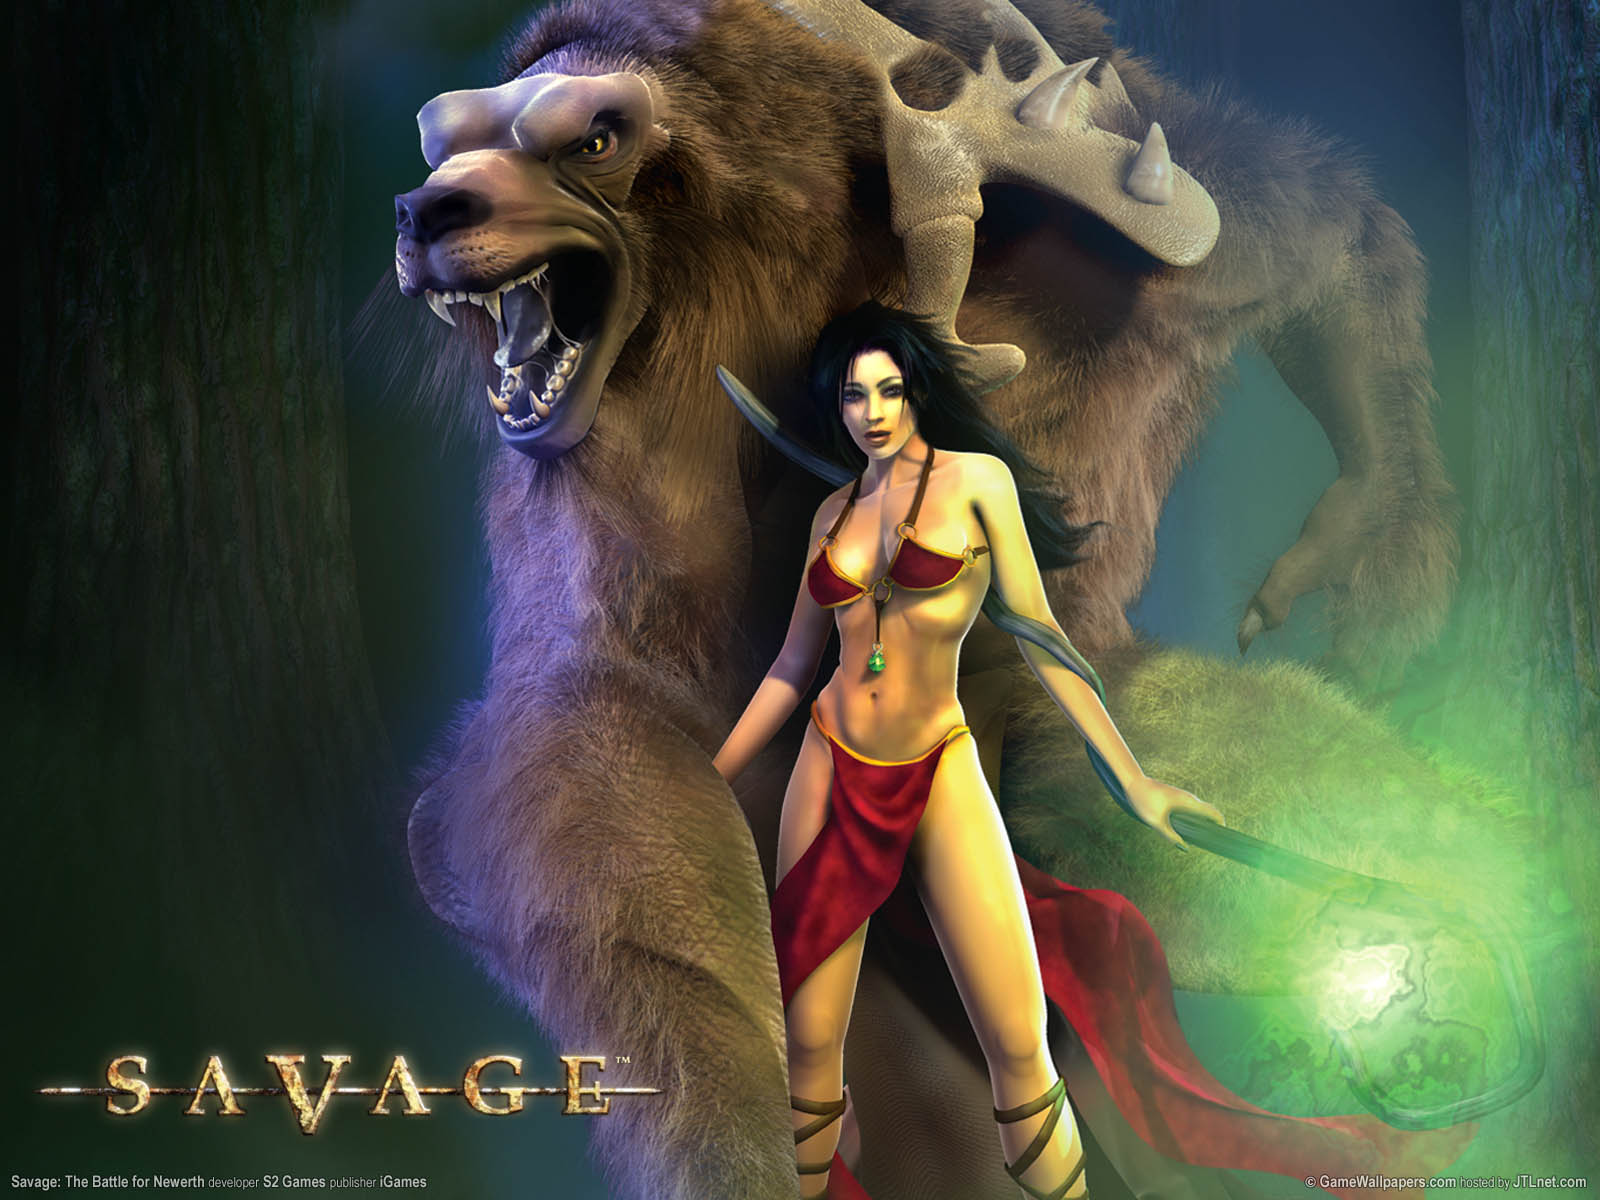 Savage: The Battle for Newerth wallpaper 01 1600x1200